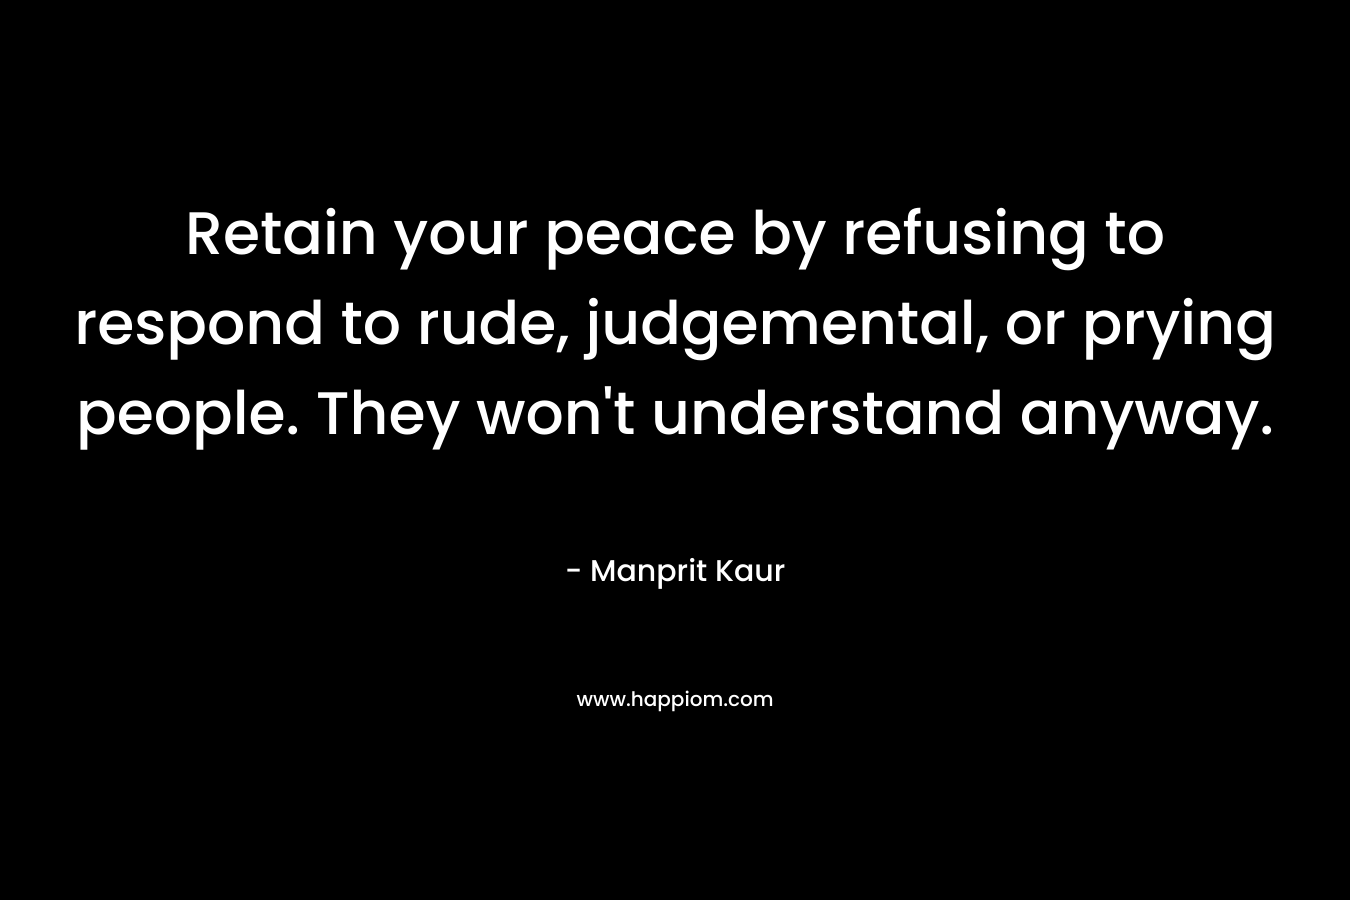 Retain your peace by refusing to respond to rude, judgemental, or prying people. They won’t understand anyway. – Manprit Kaur